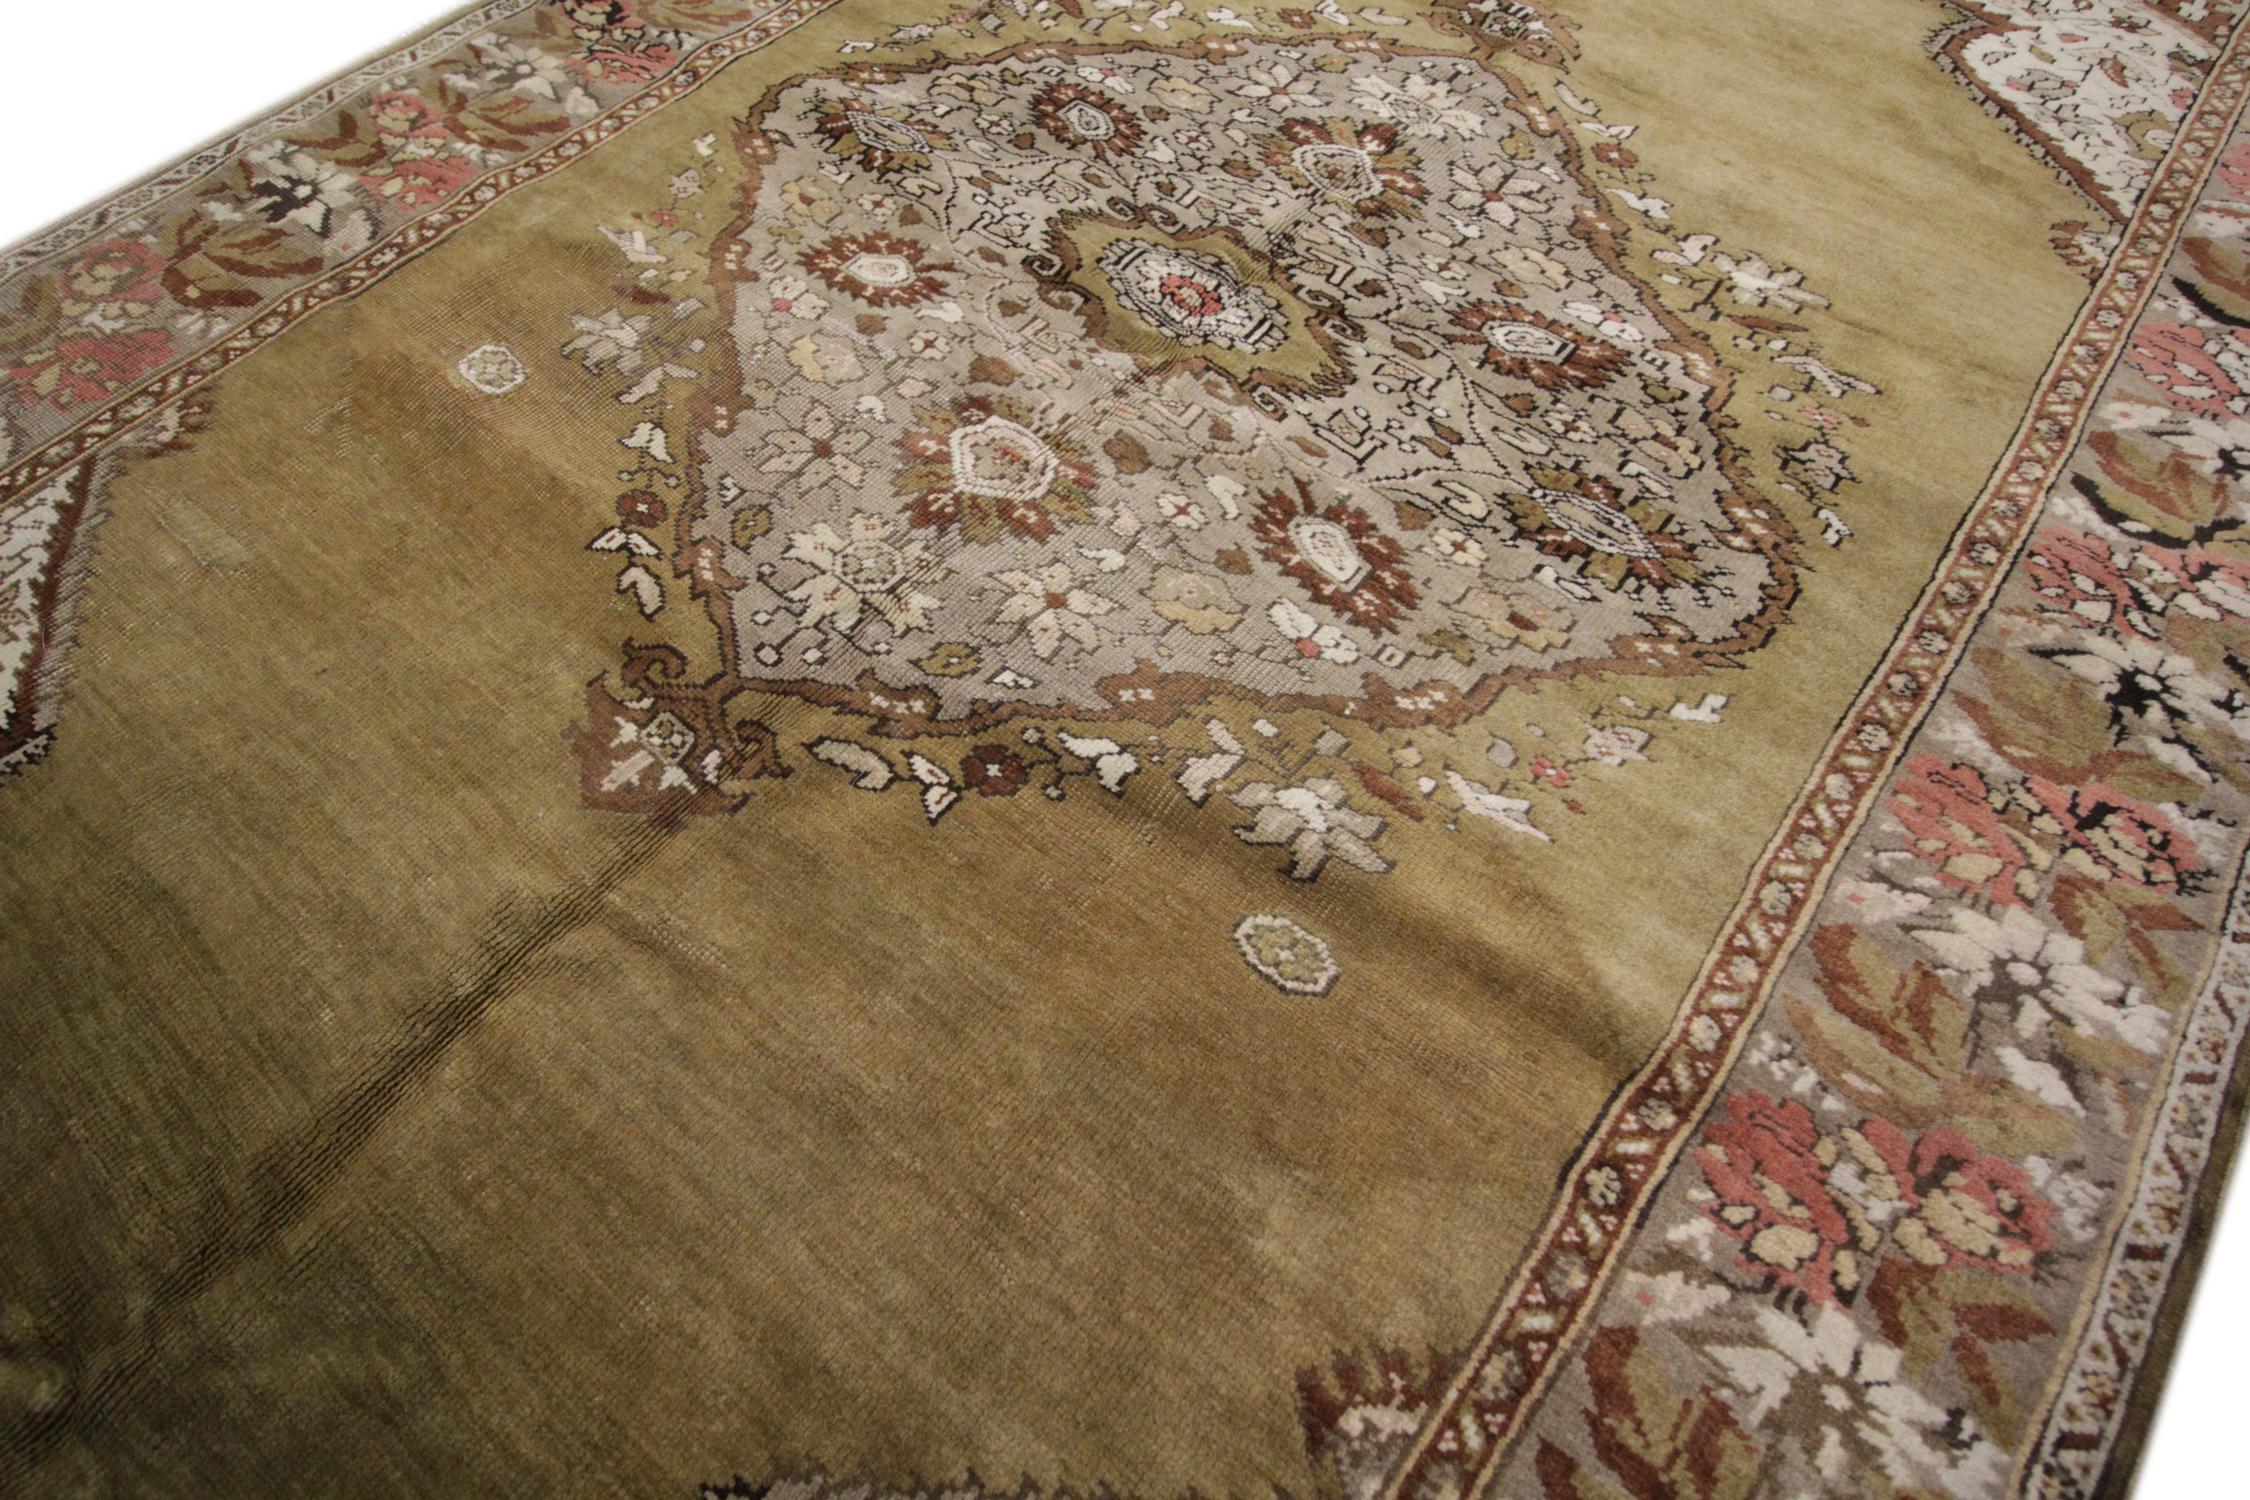 Handmade Carpet Area Oriental Rug, Antique Green Wool Living Room Rug for Sale In Excellent Condition For Sale In Hampshire, GB